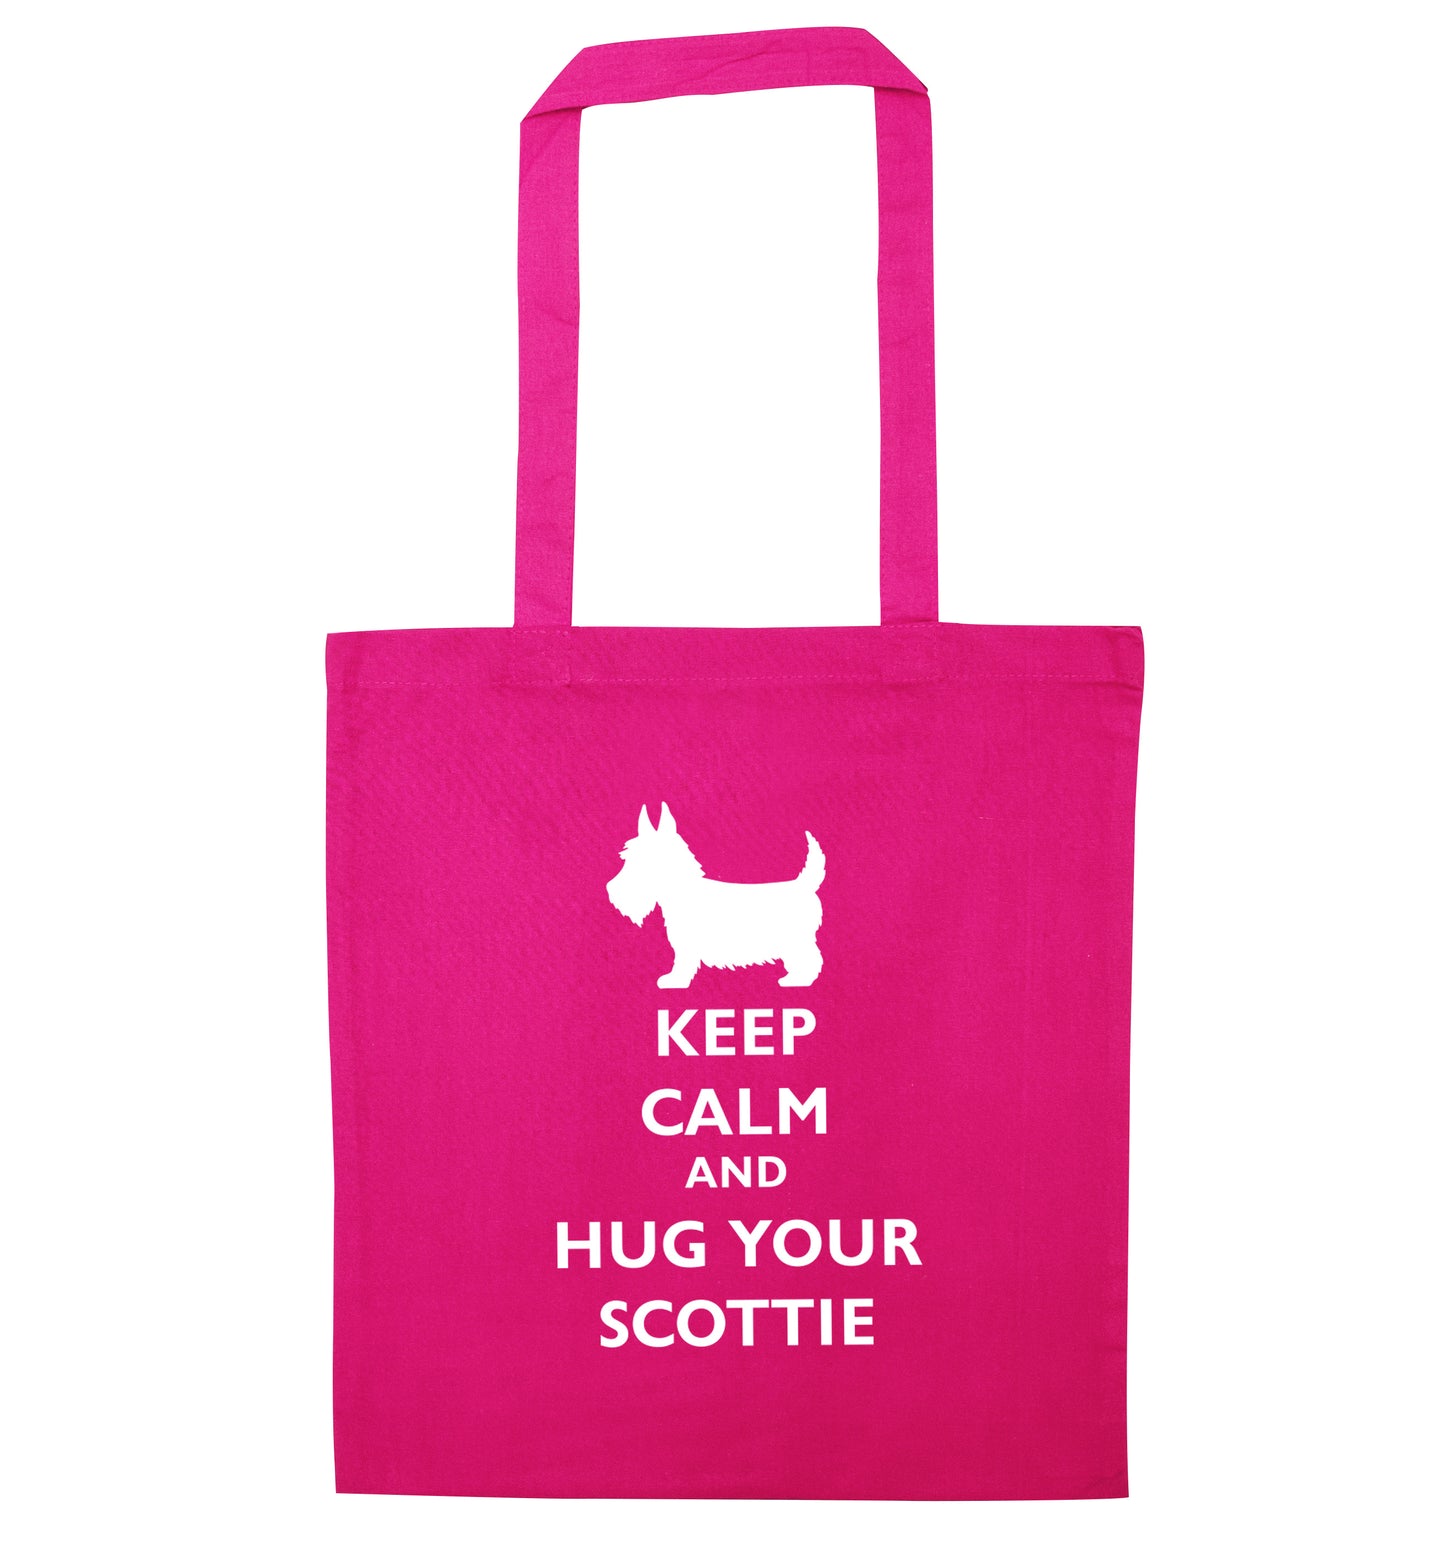 Keep calm and hug your scottie pink tote bag